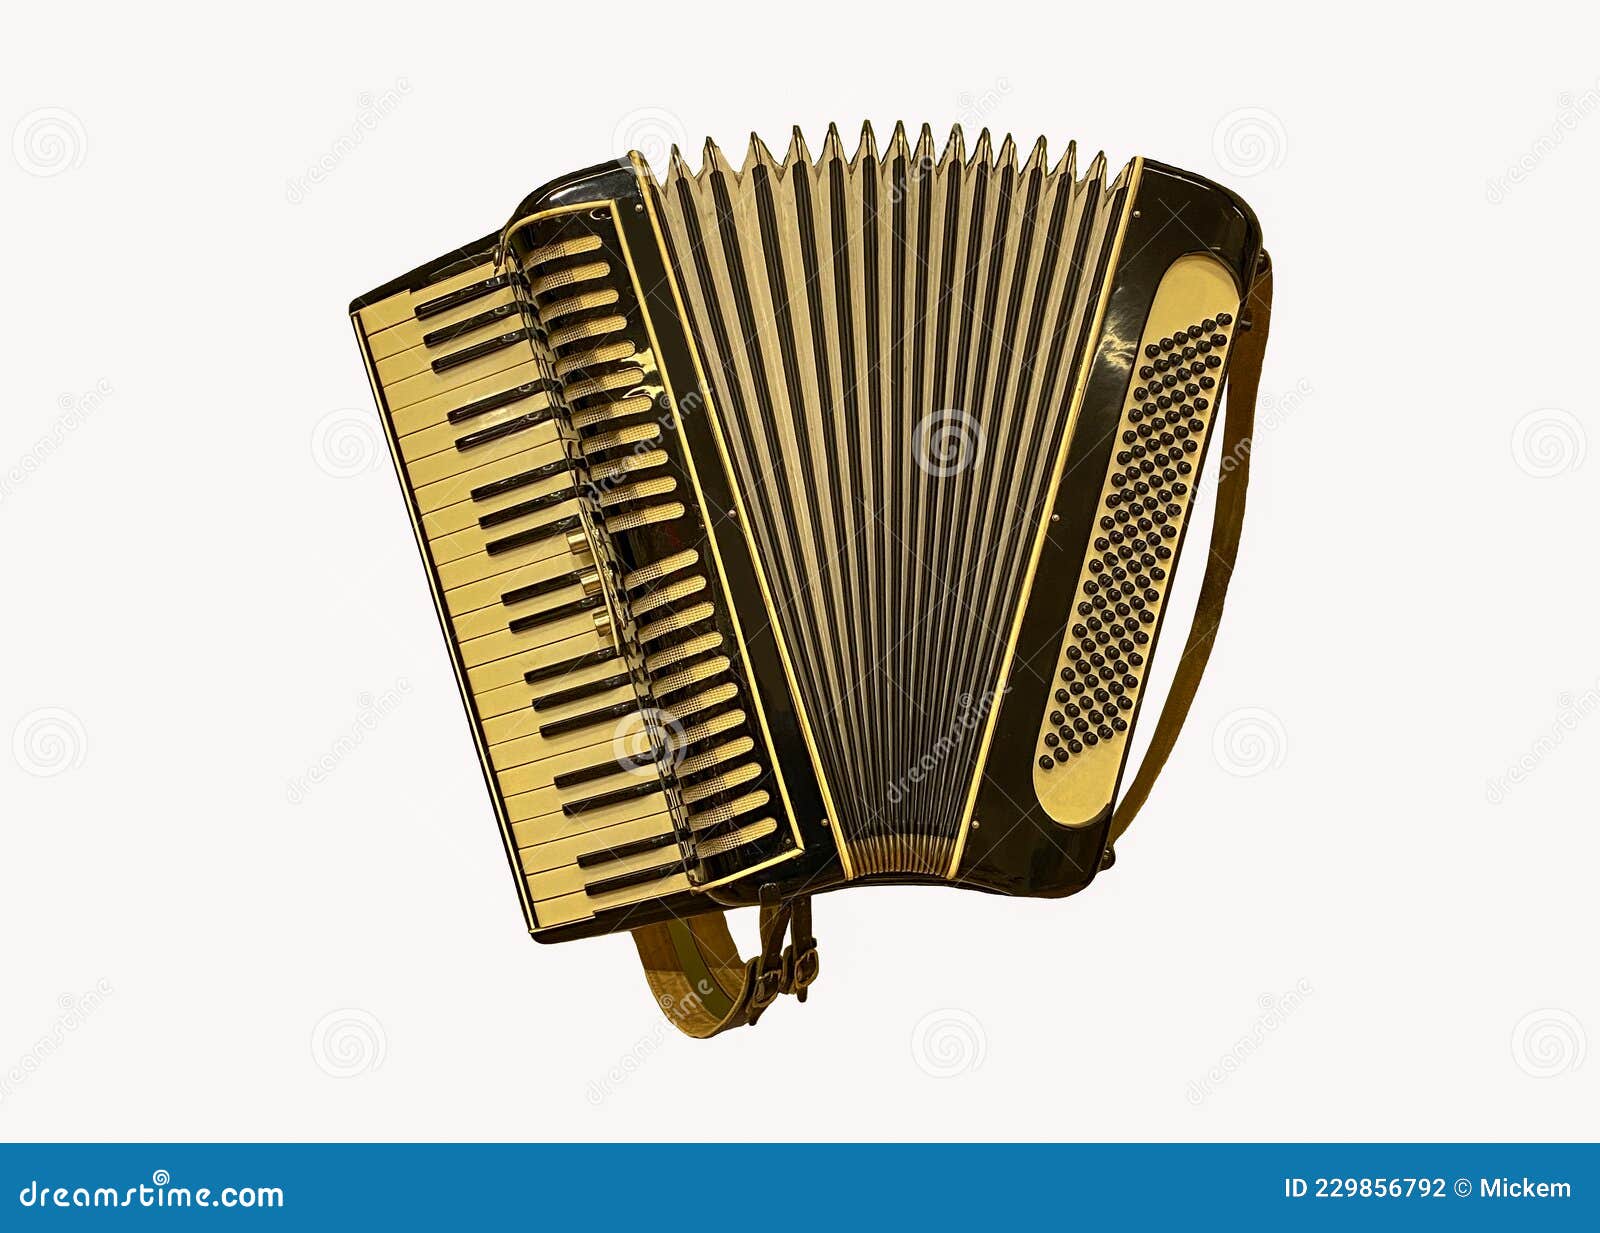 Piano Accordion Musical Instrument Isolated Stock Photo - Image of ...